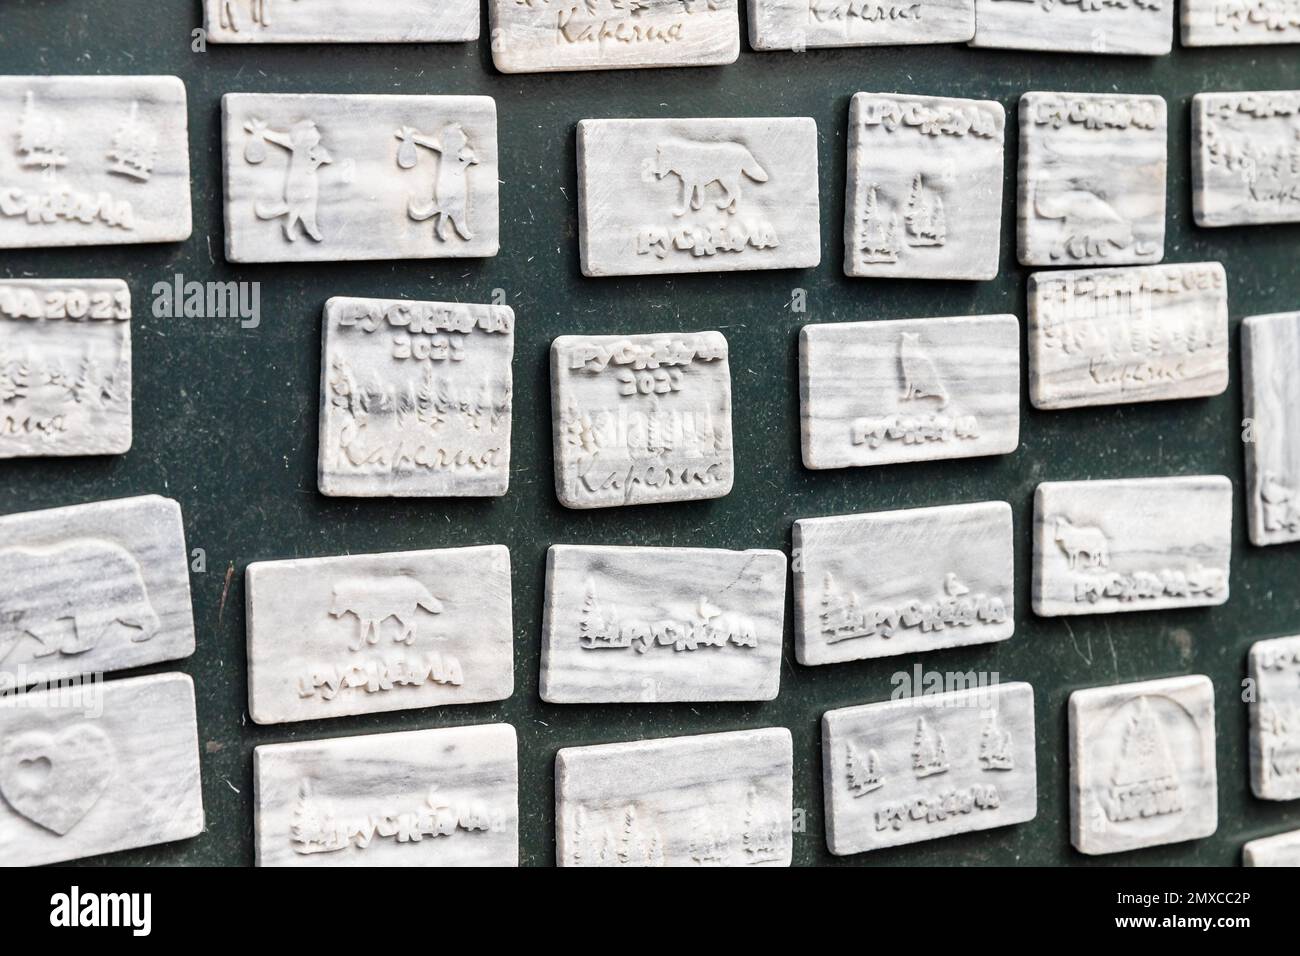 Ruskeala, Russia - June 12, 2021: White marble magnets with decorative carvings. Text means Ruskeala town name in Russian Stock Photo